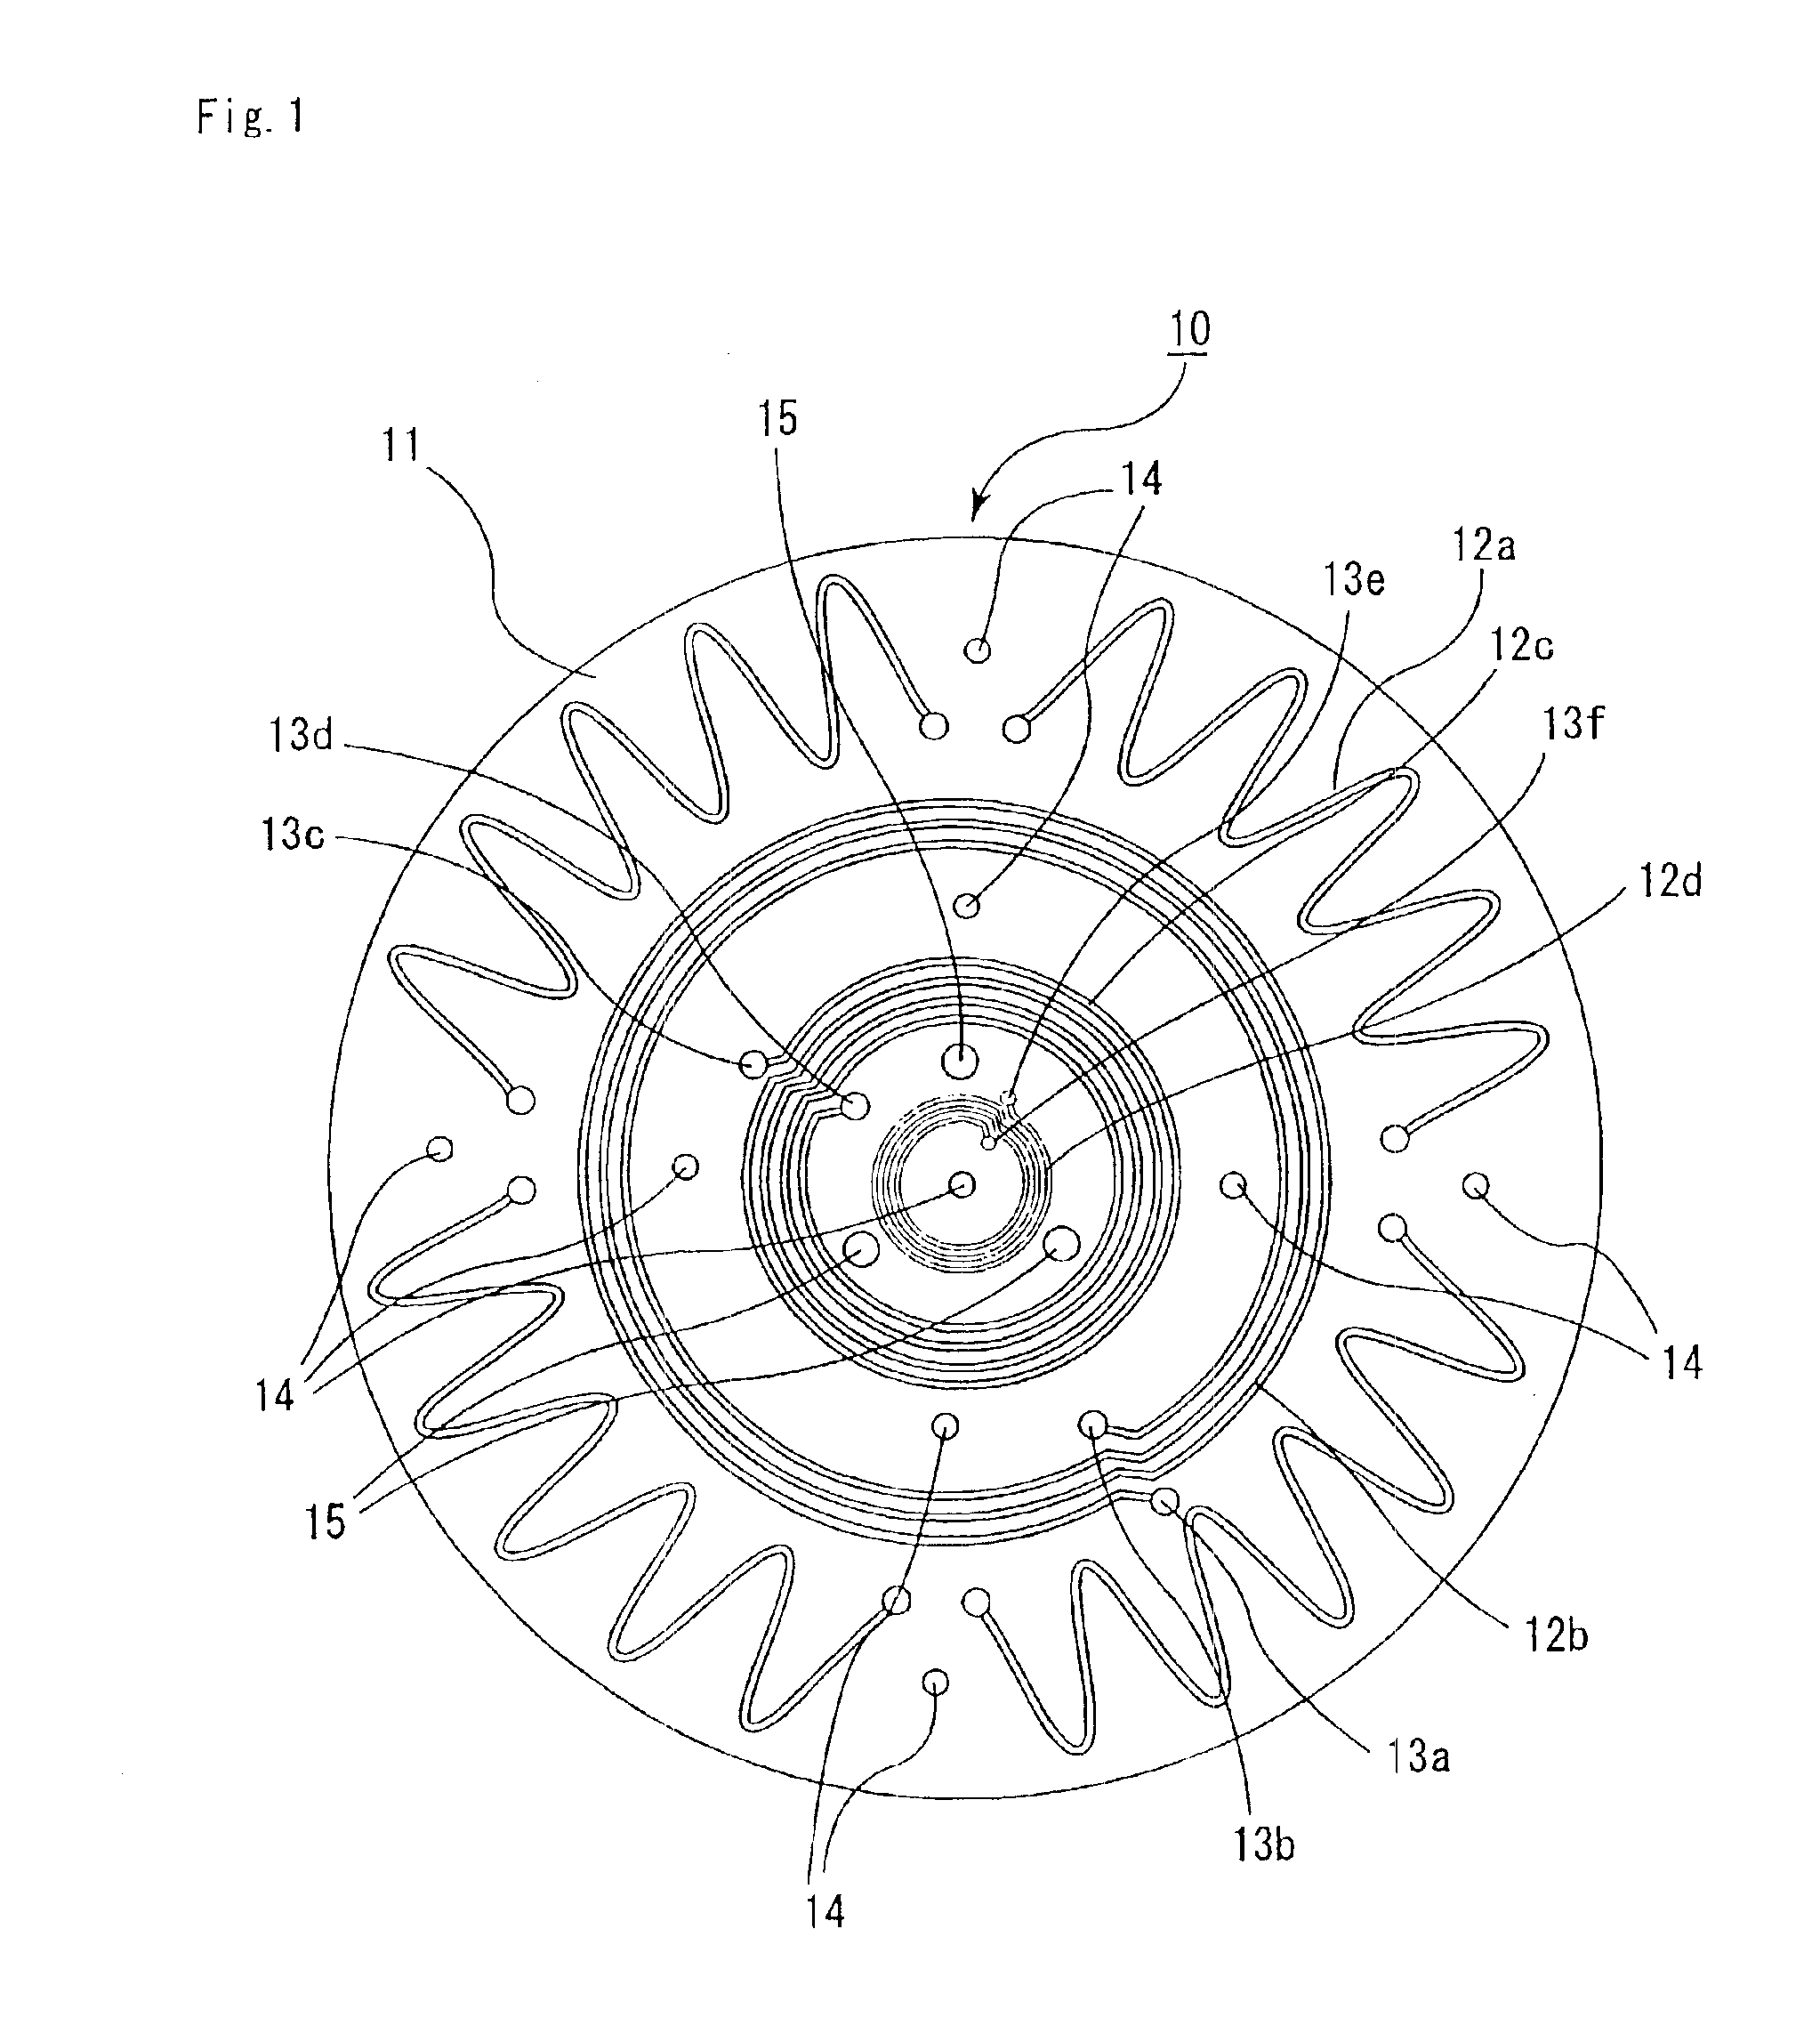 Ceramic heater for semiconductor manufacturing/testing apparatus